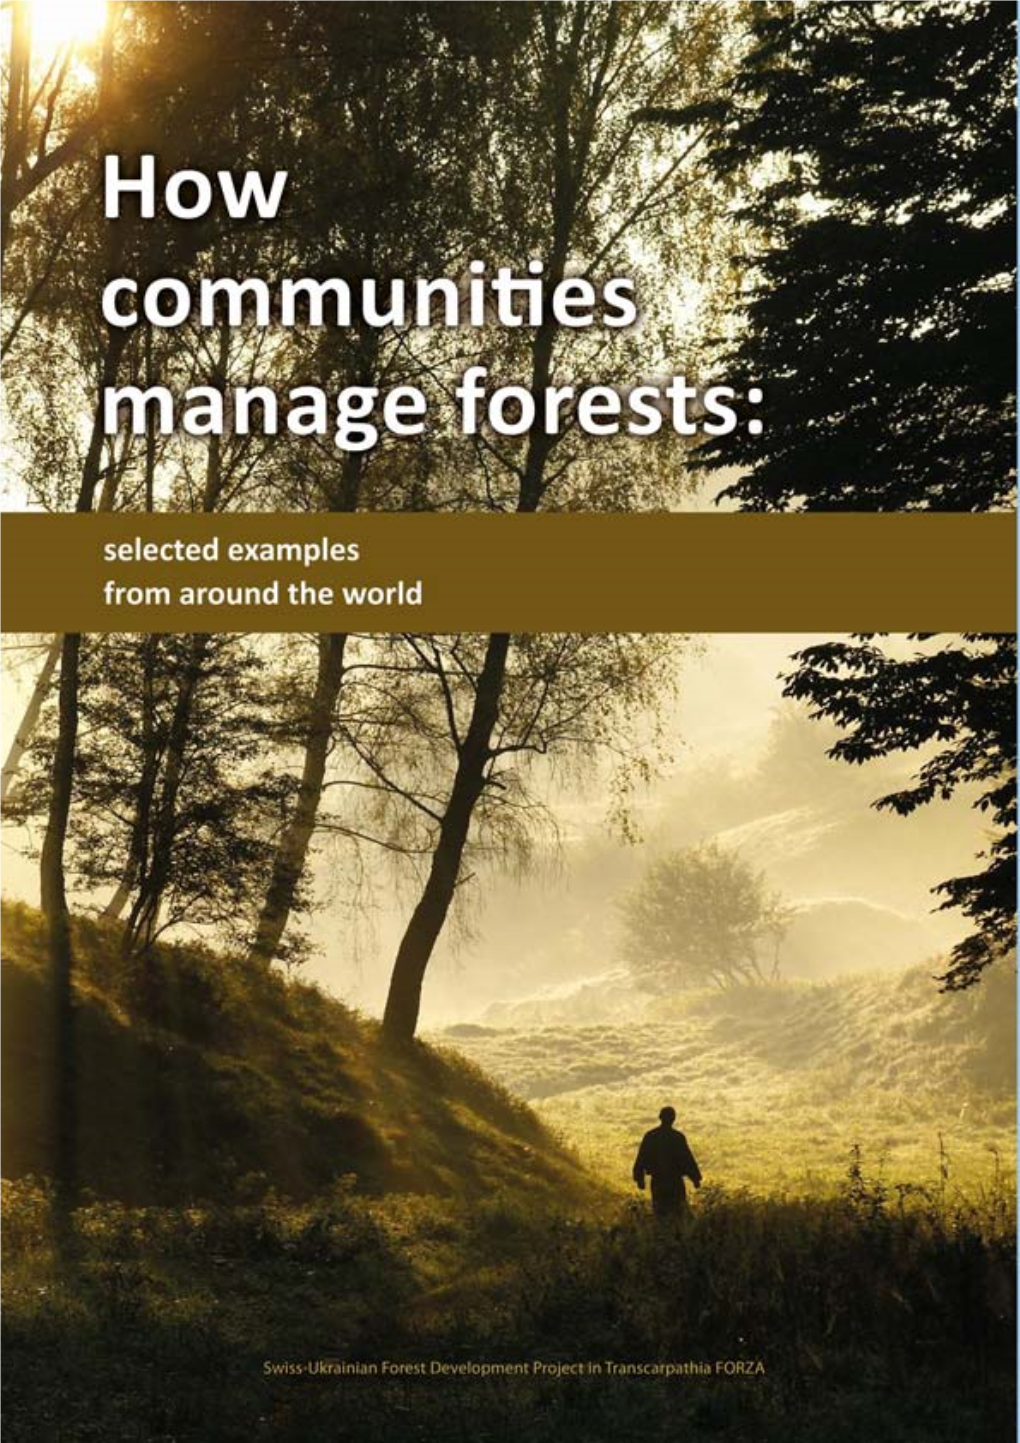 Municipalities Take Action in Forest Management